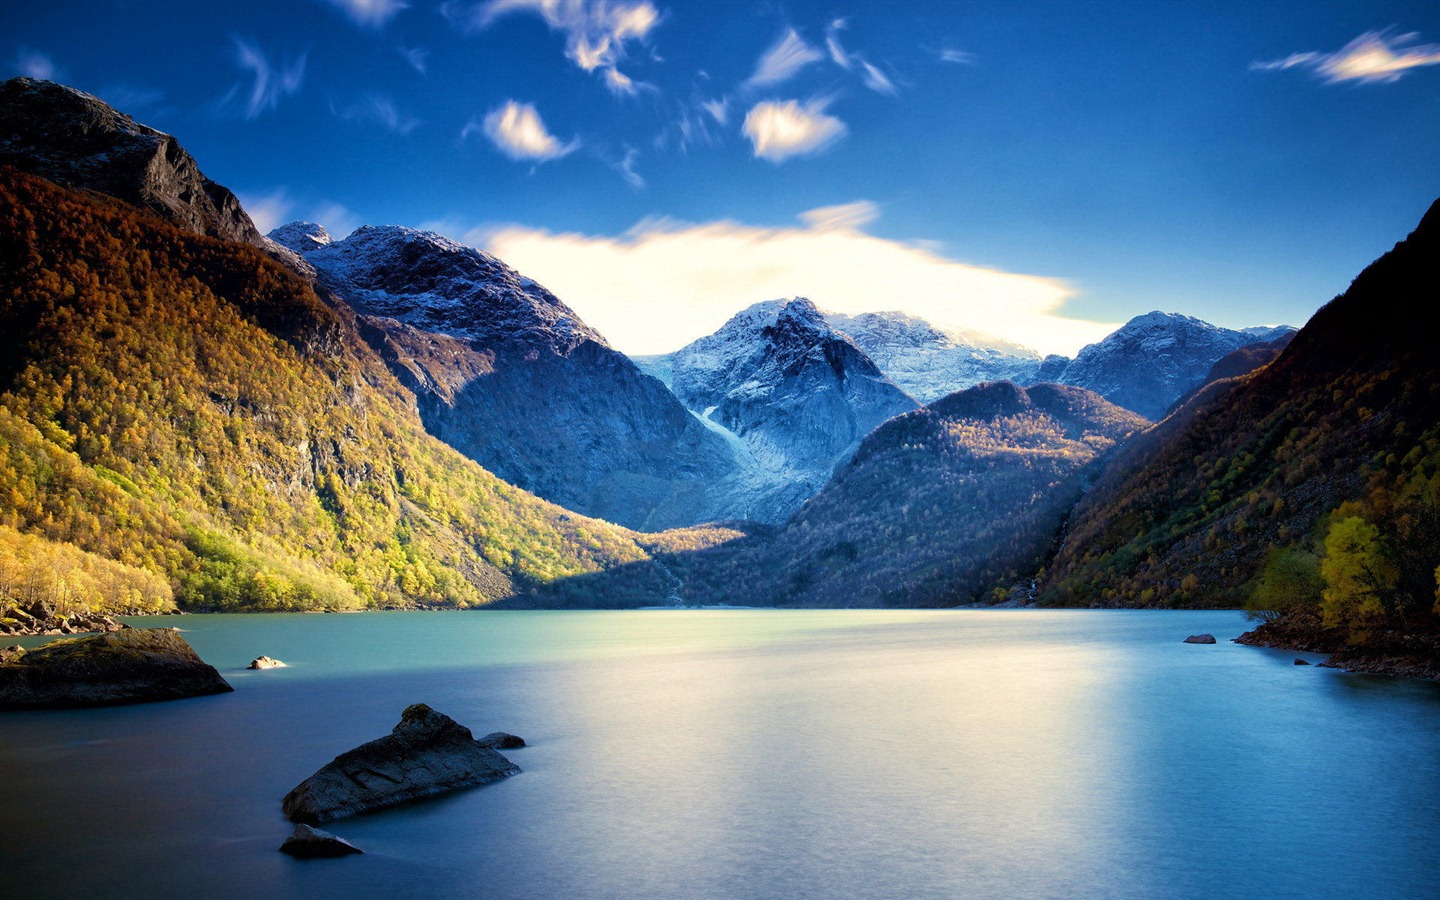 Lakes, sea, trees, forests, mountains, beautiful scenery wallpaper #2 - 1440x900